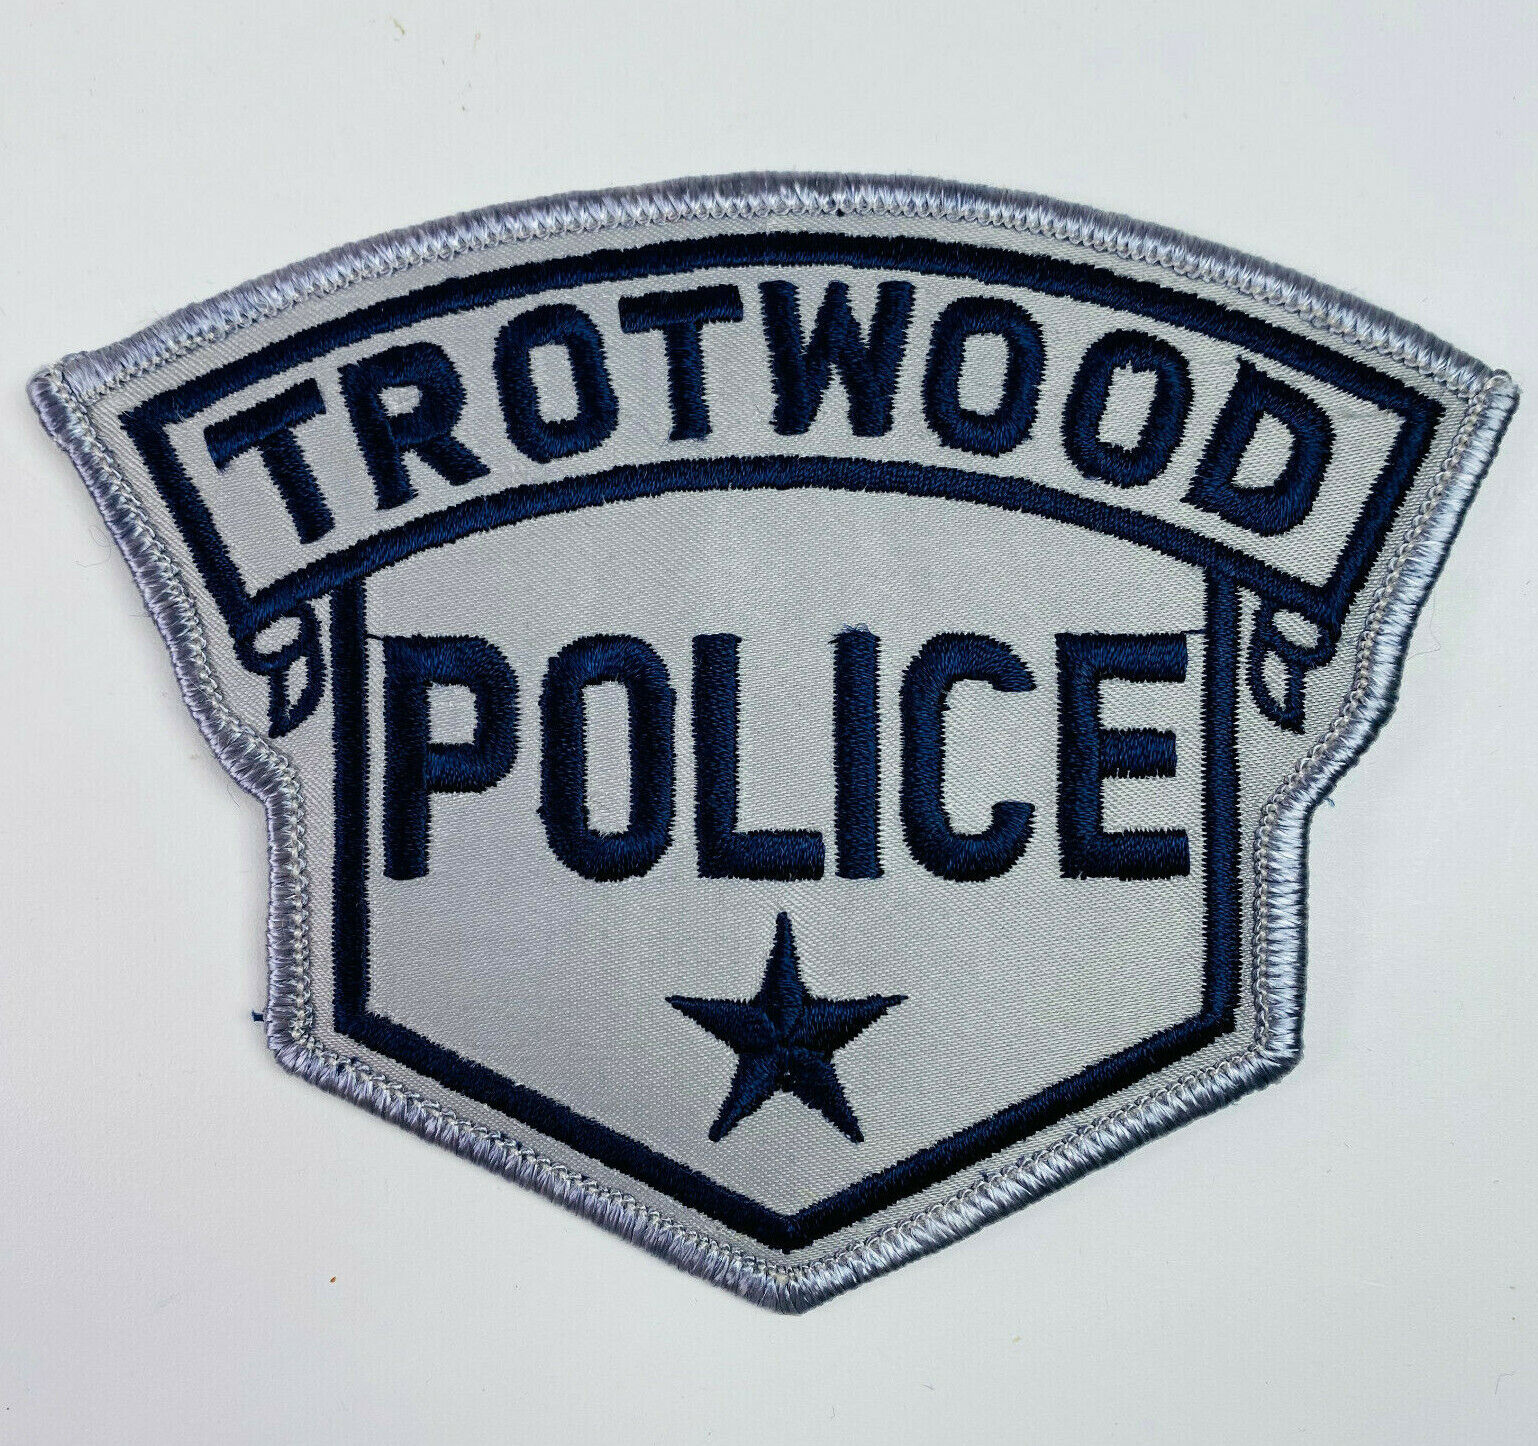 Trotwood Ohio OH Patch A4